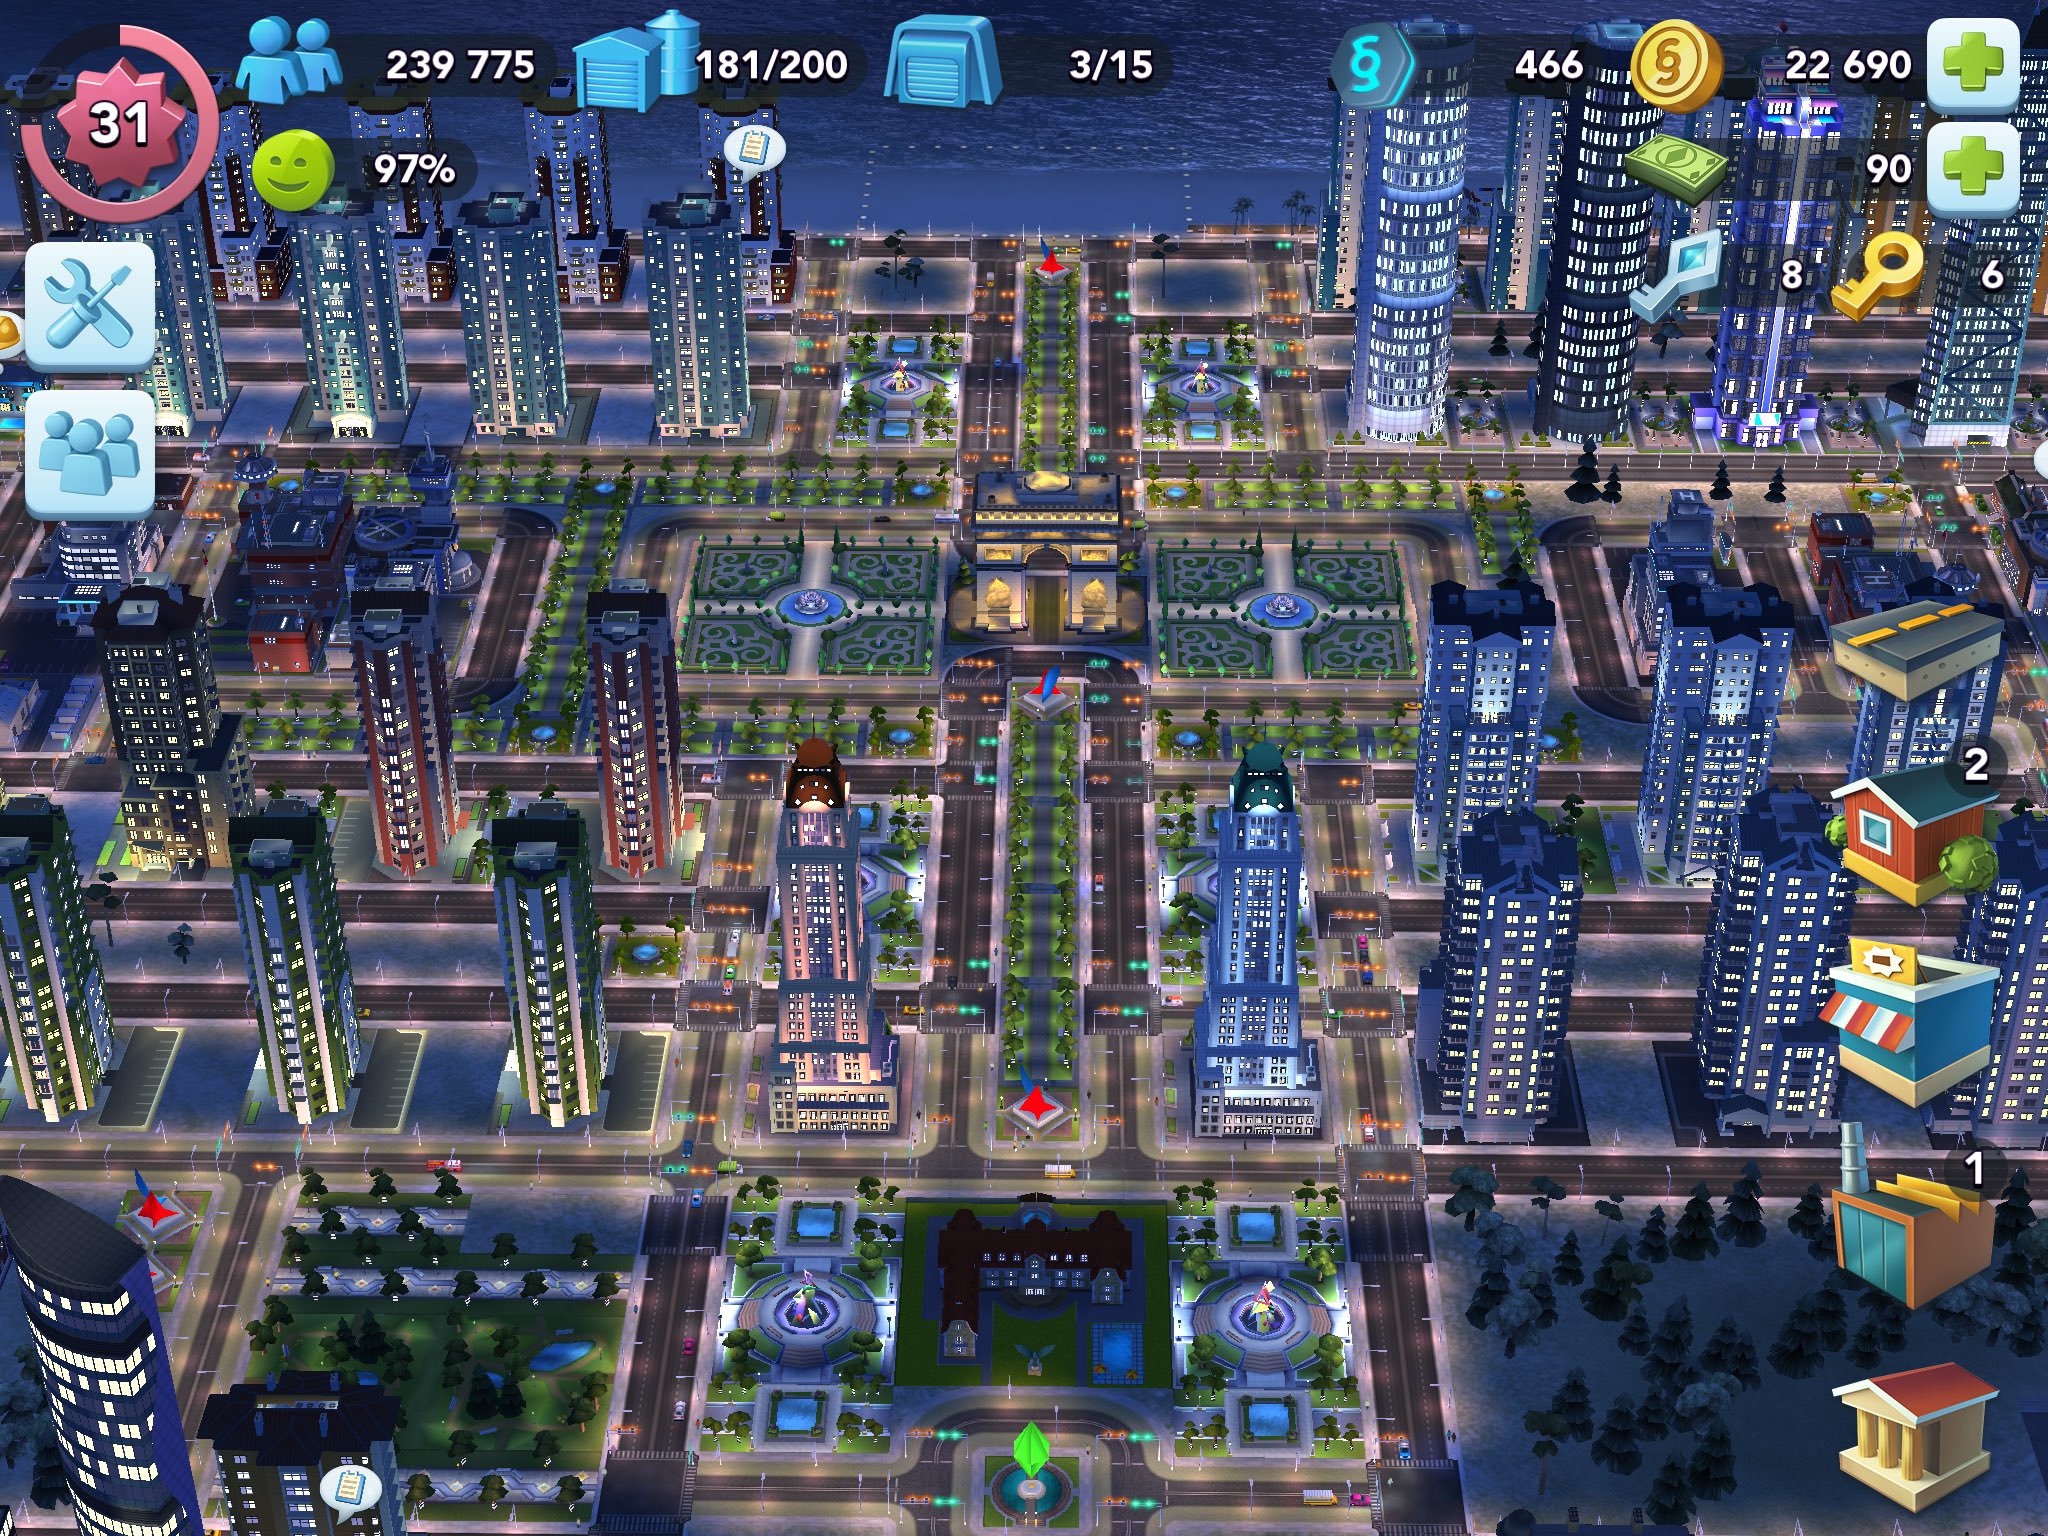 Simcity Buildit Quot What Do You Focus On In Your City High Population Or Layout